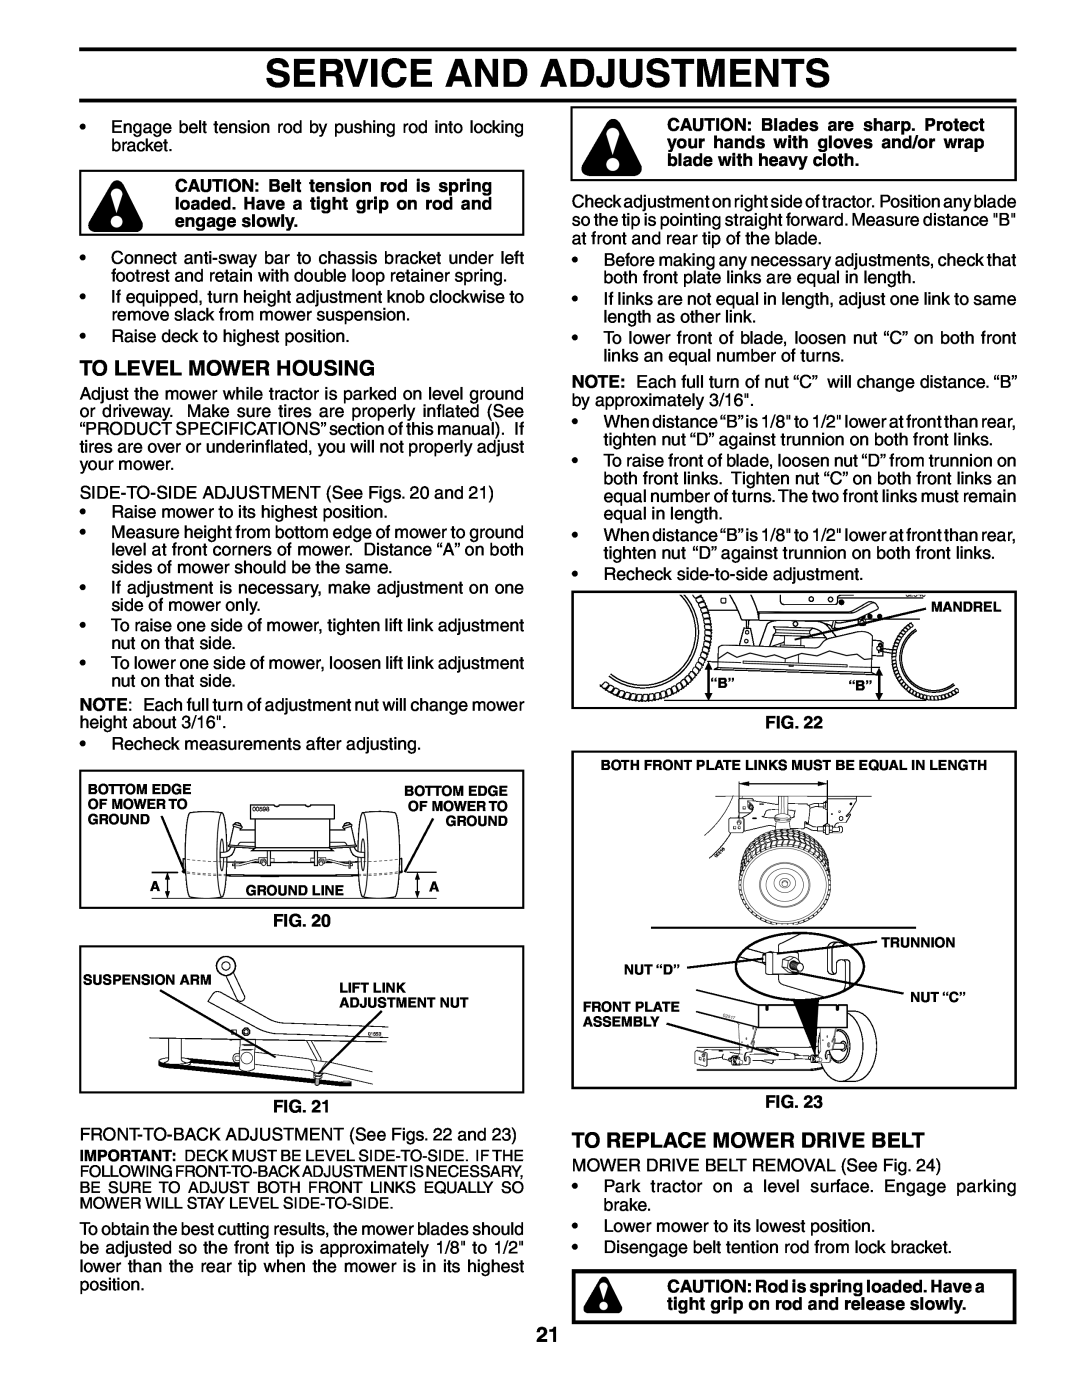 Poulan PD20PH48STA owner manual To Level Mower Housing, To Replace Mower Drive Belt, Service And Adjustments 